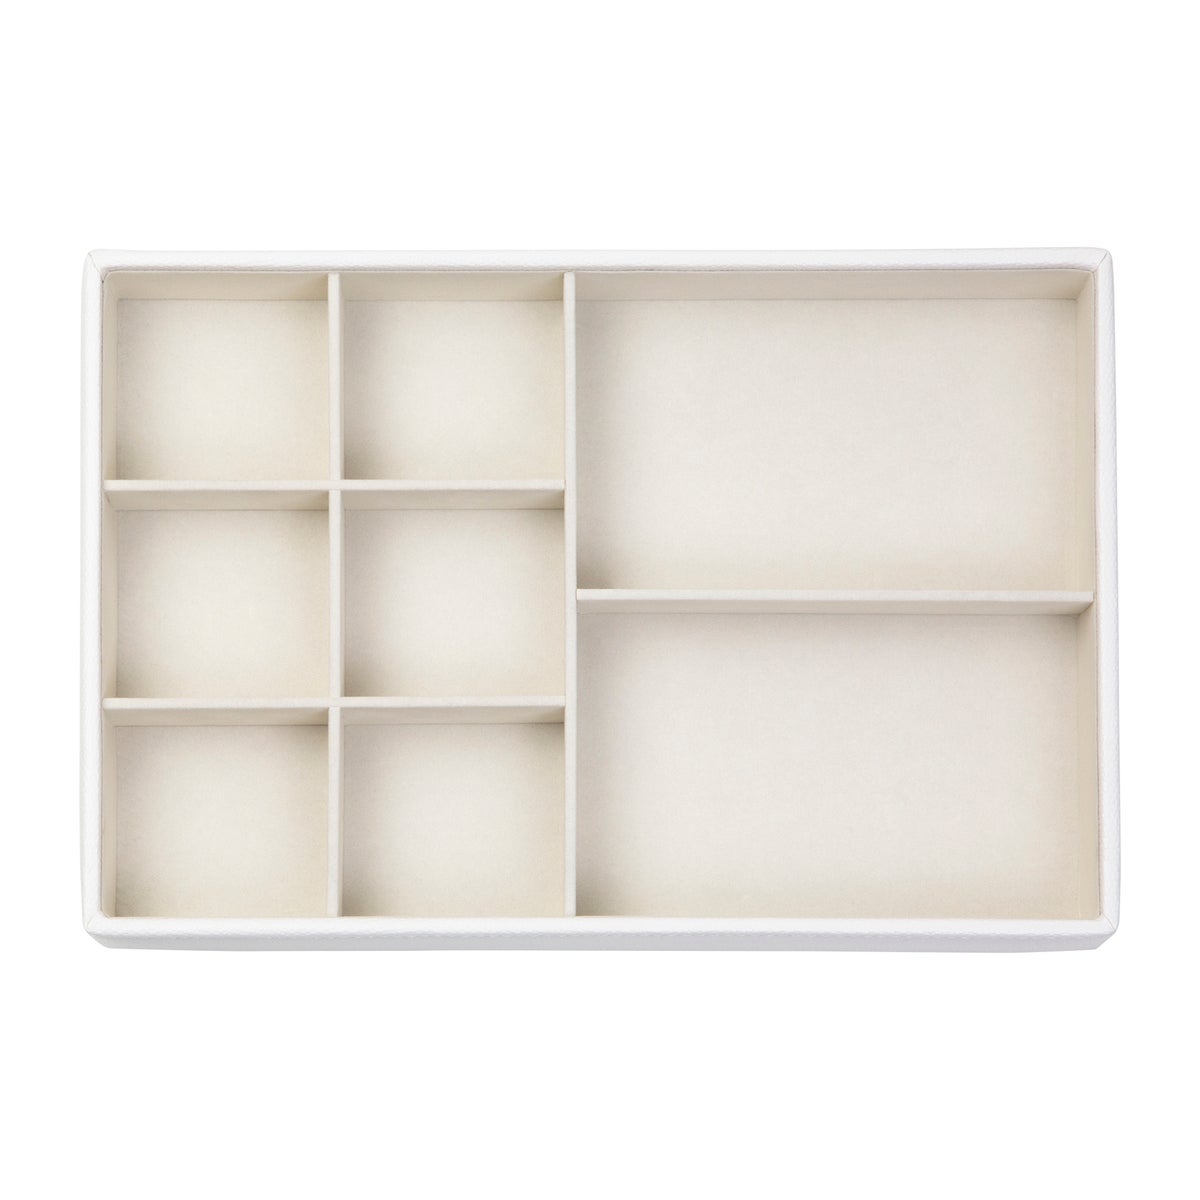 8 Comp Tray Pebbled White (4)